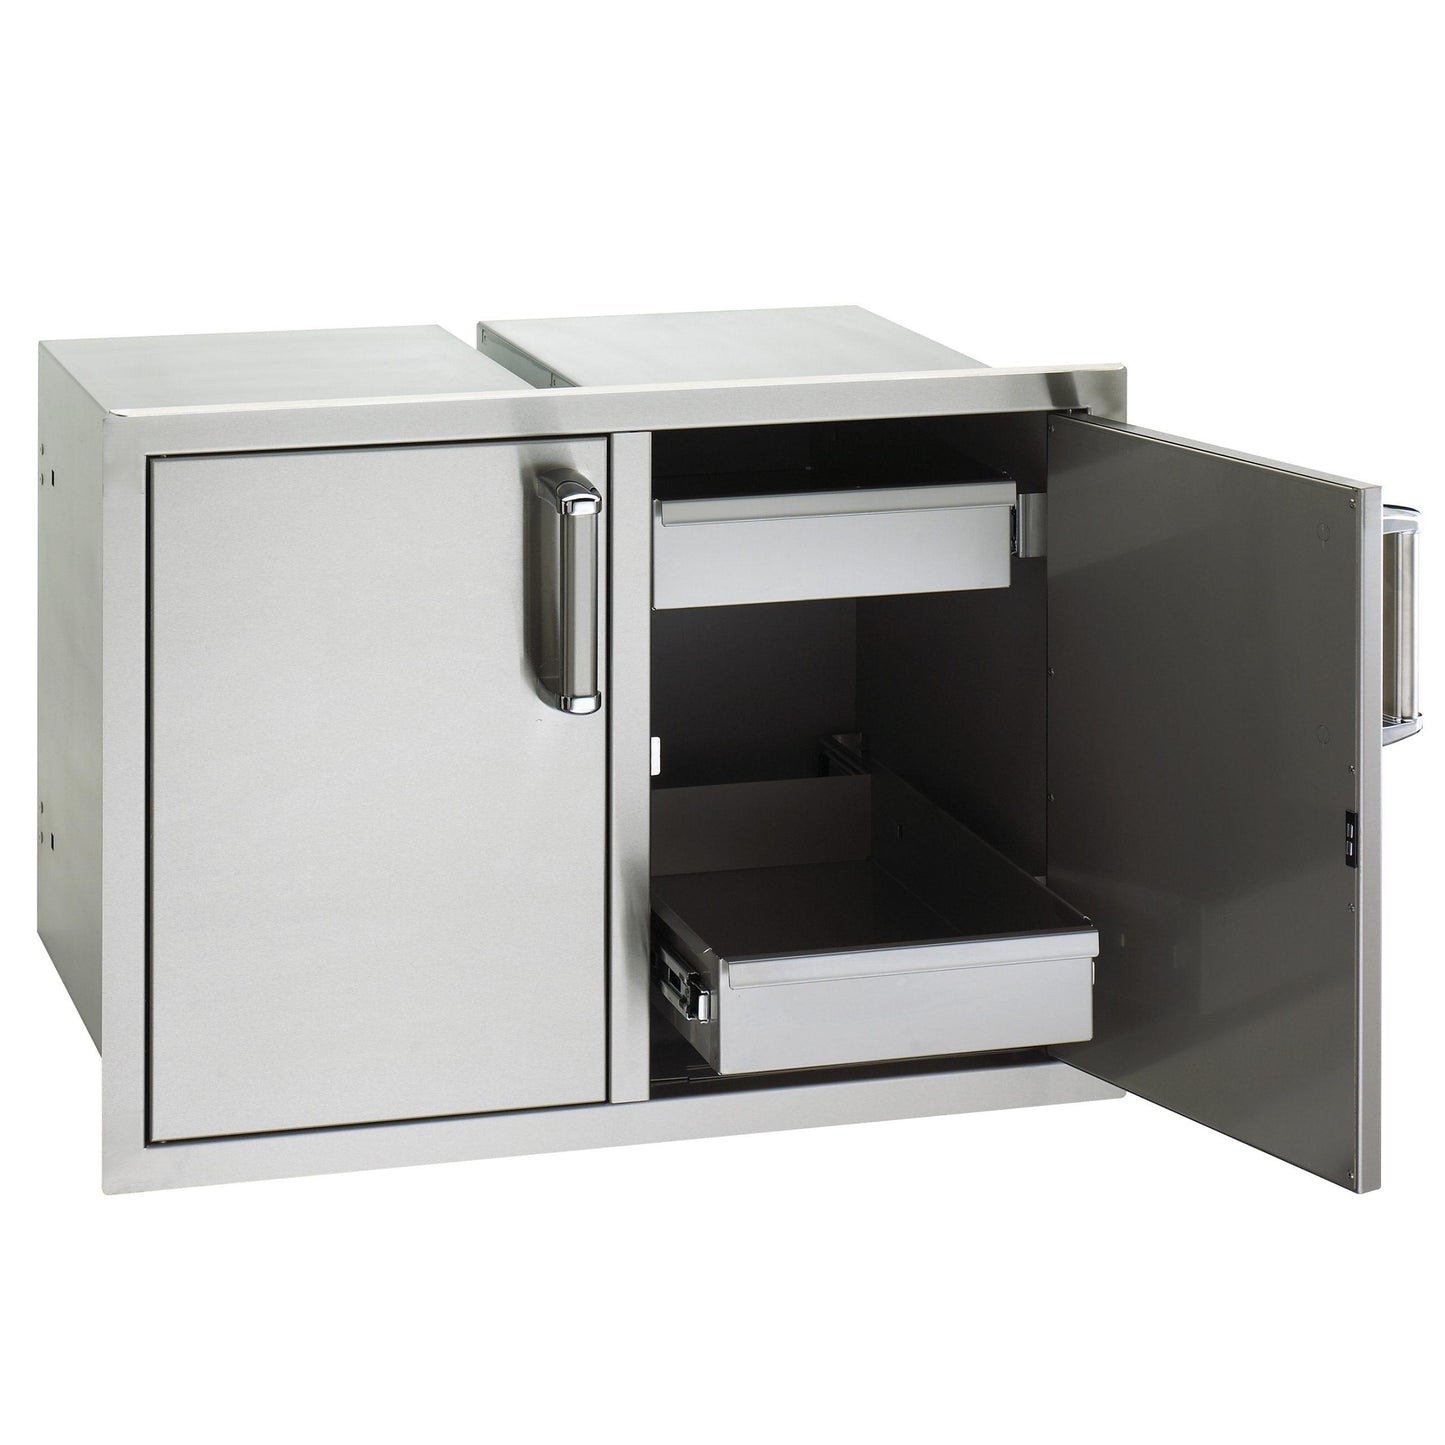 Fire Magic 53930SC22 Flush Double Doors With Dual Drawers